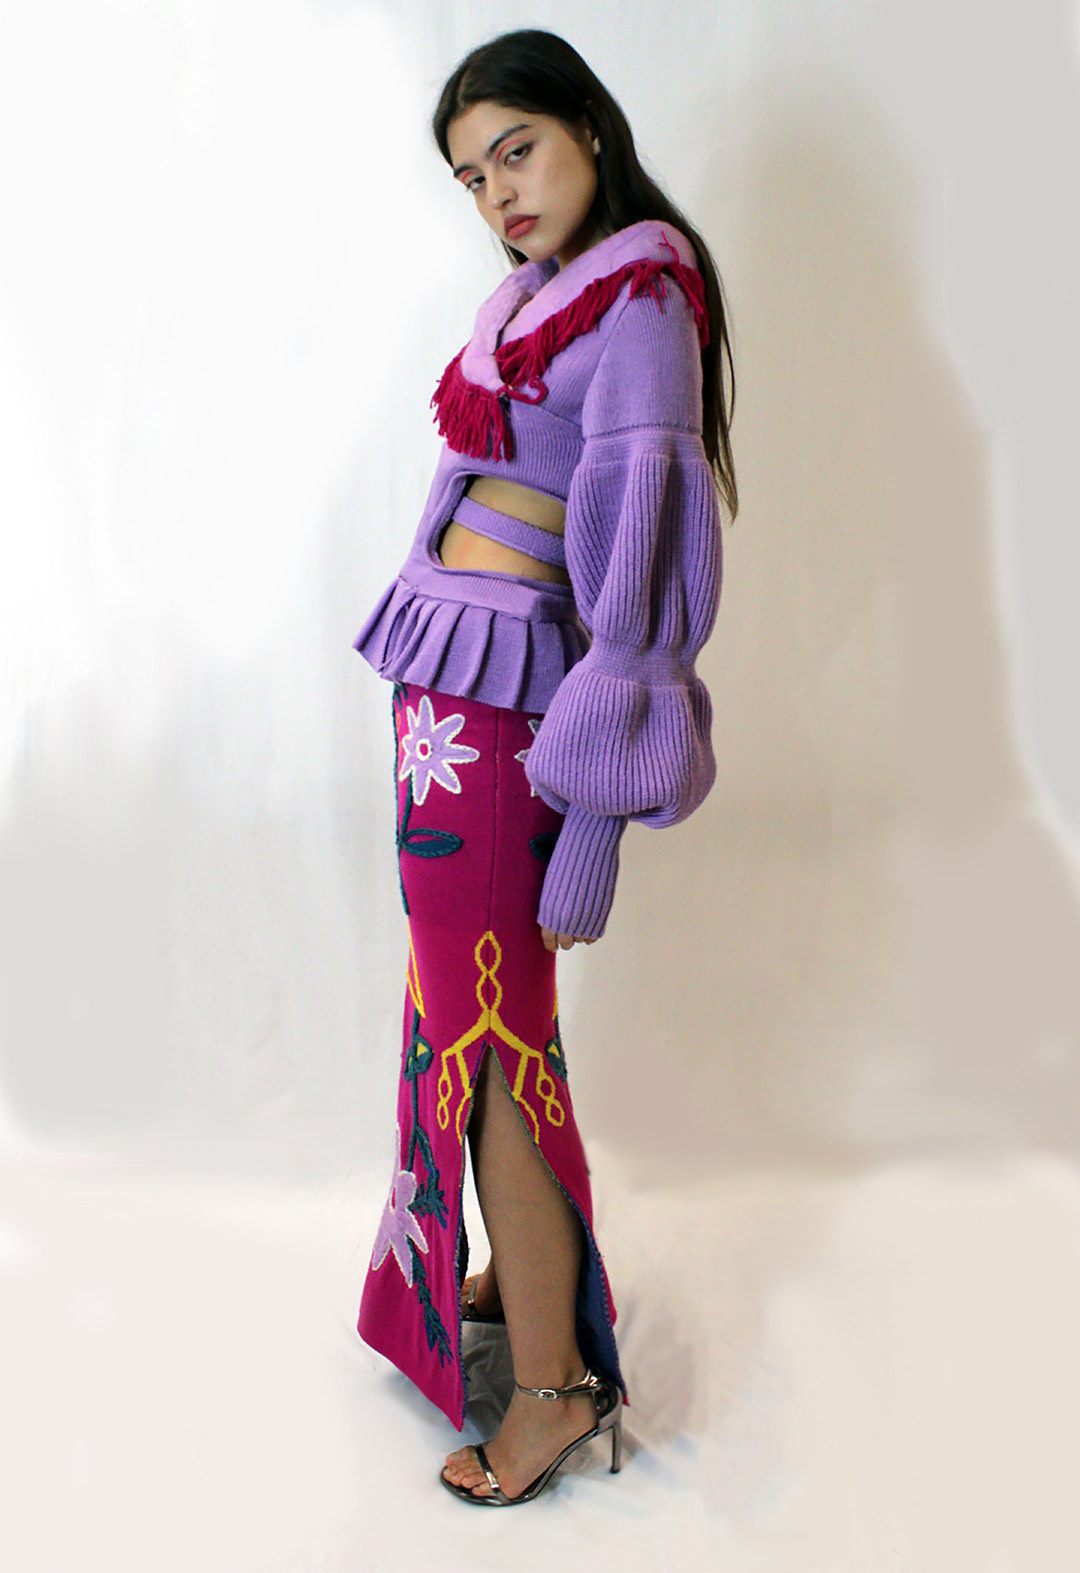 A model standing against a white background. She has long hair and is wearing a lavender color knit wrap top with shaped sleeves and crochet fringe at the shawl collar. She is also wearing a skirt with a floral jacquard multicolor pattern.